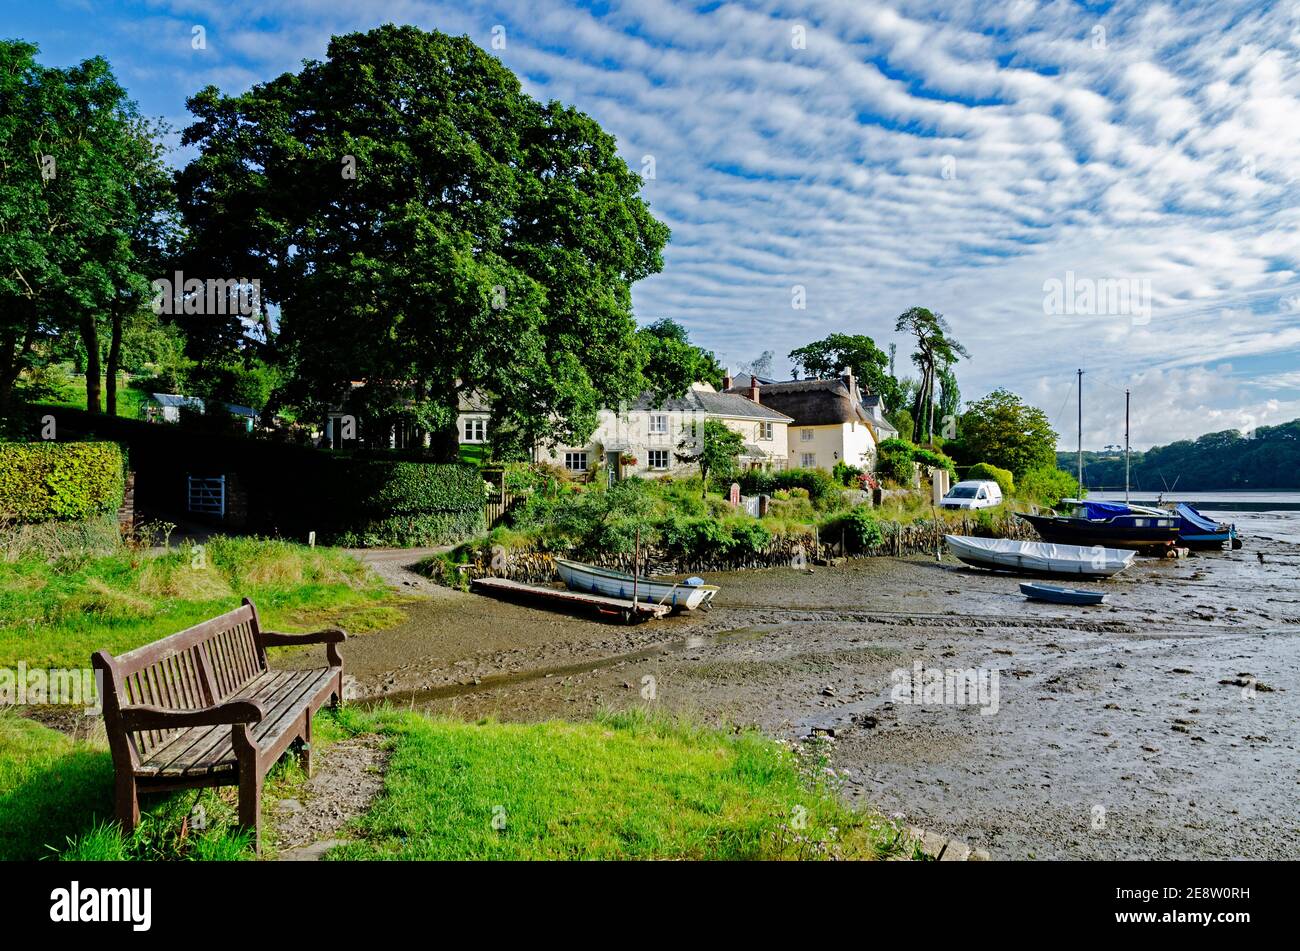 Peaceful summer day at st clement village near truro in cornwall england Stock Photo